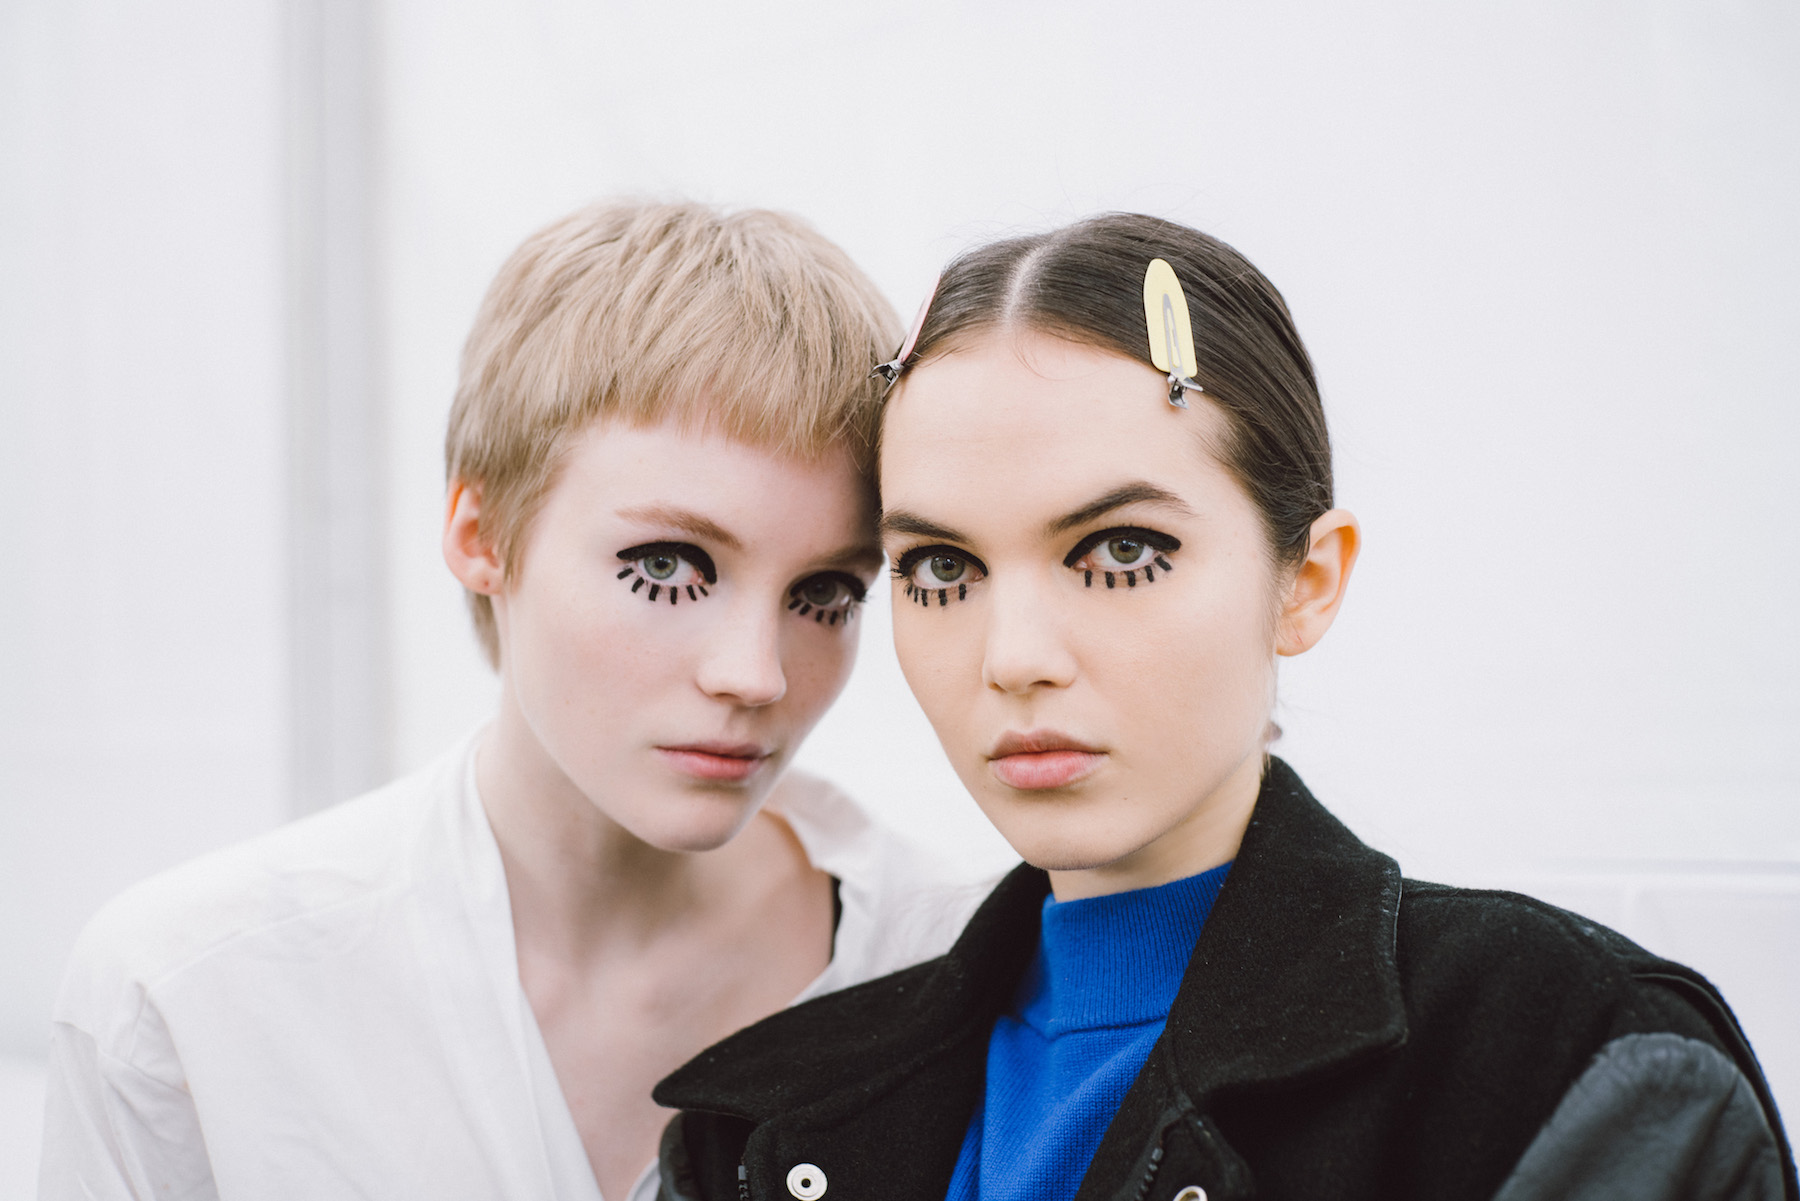 Lucan &amp; Lily, Dior Fall 2019